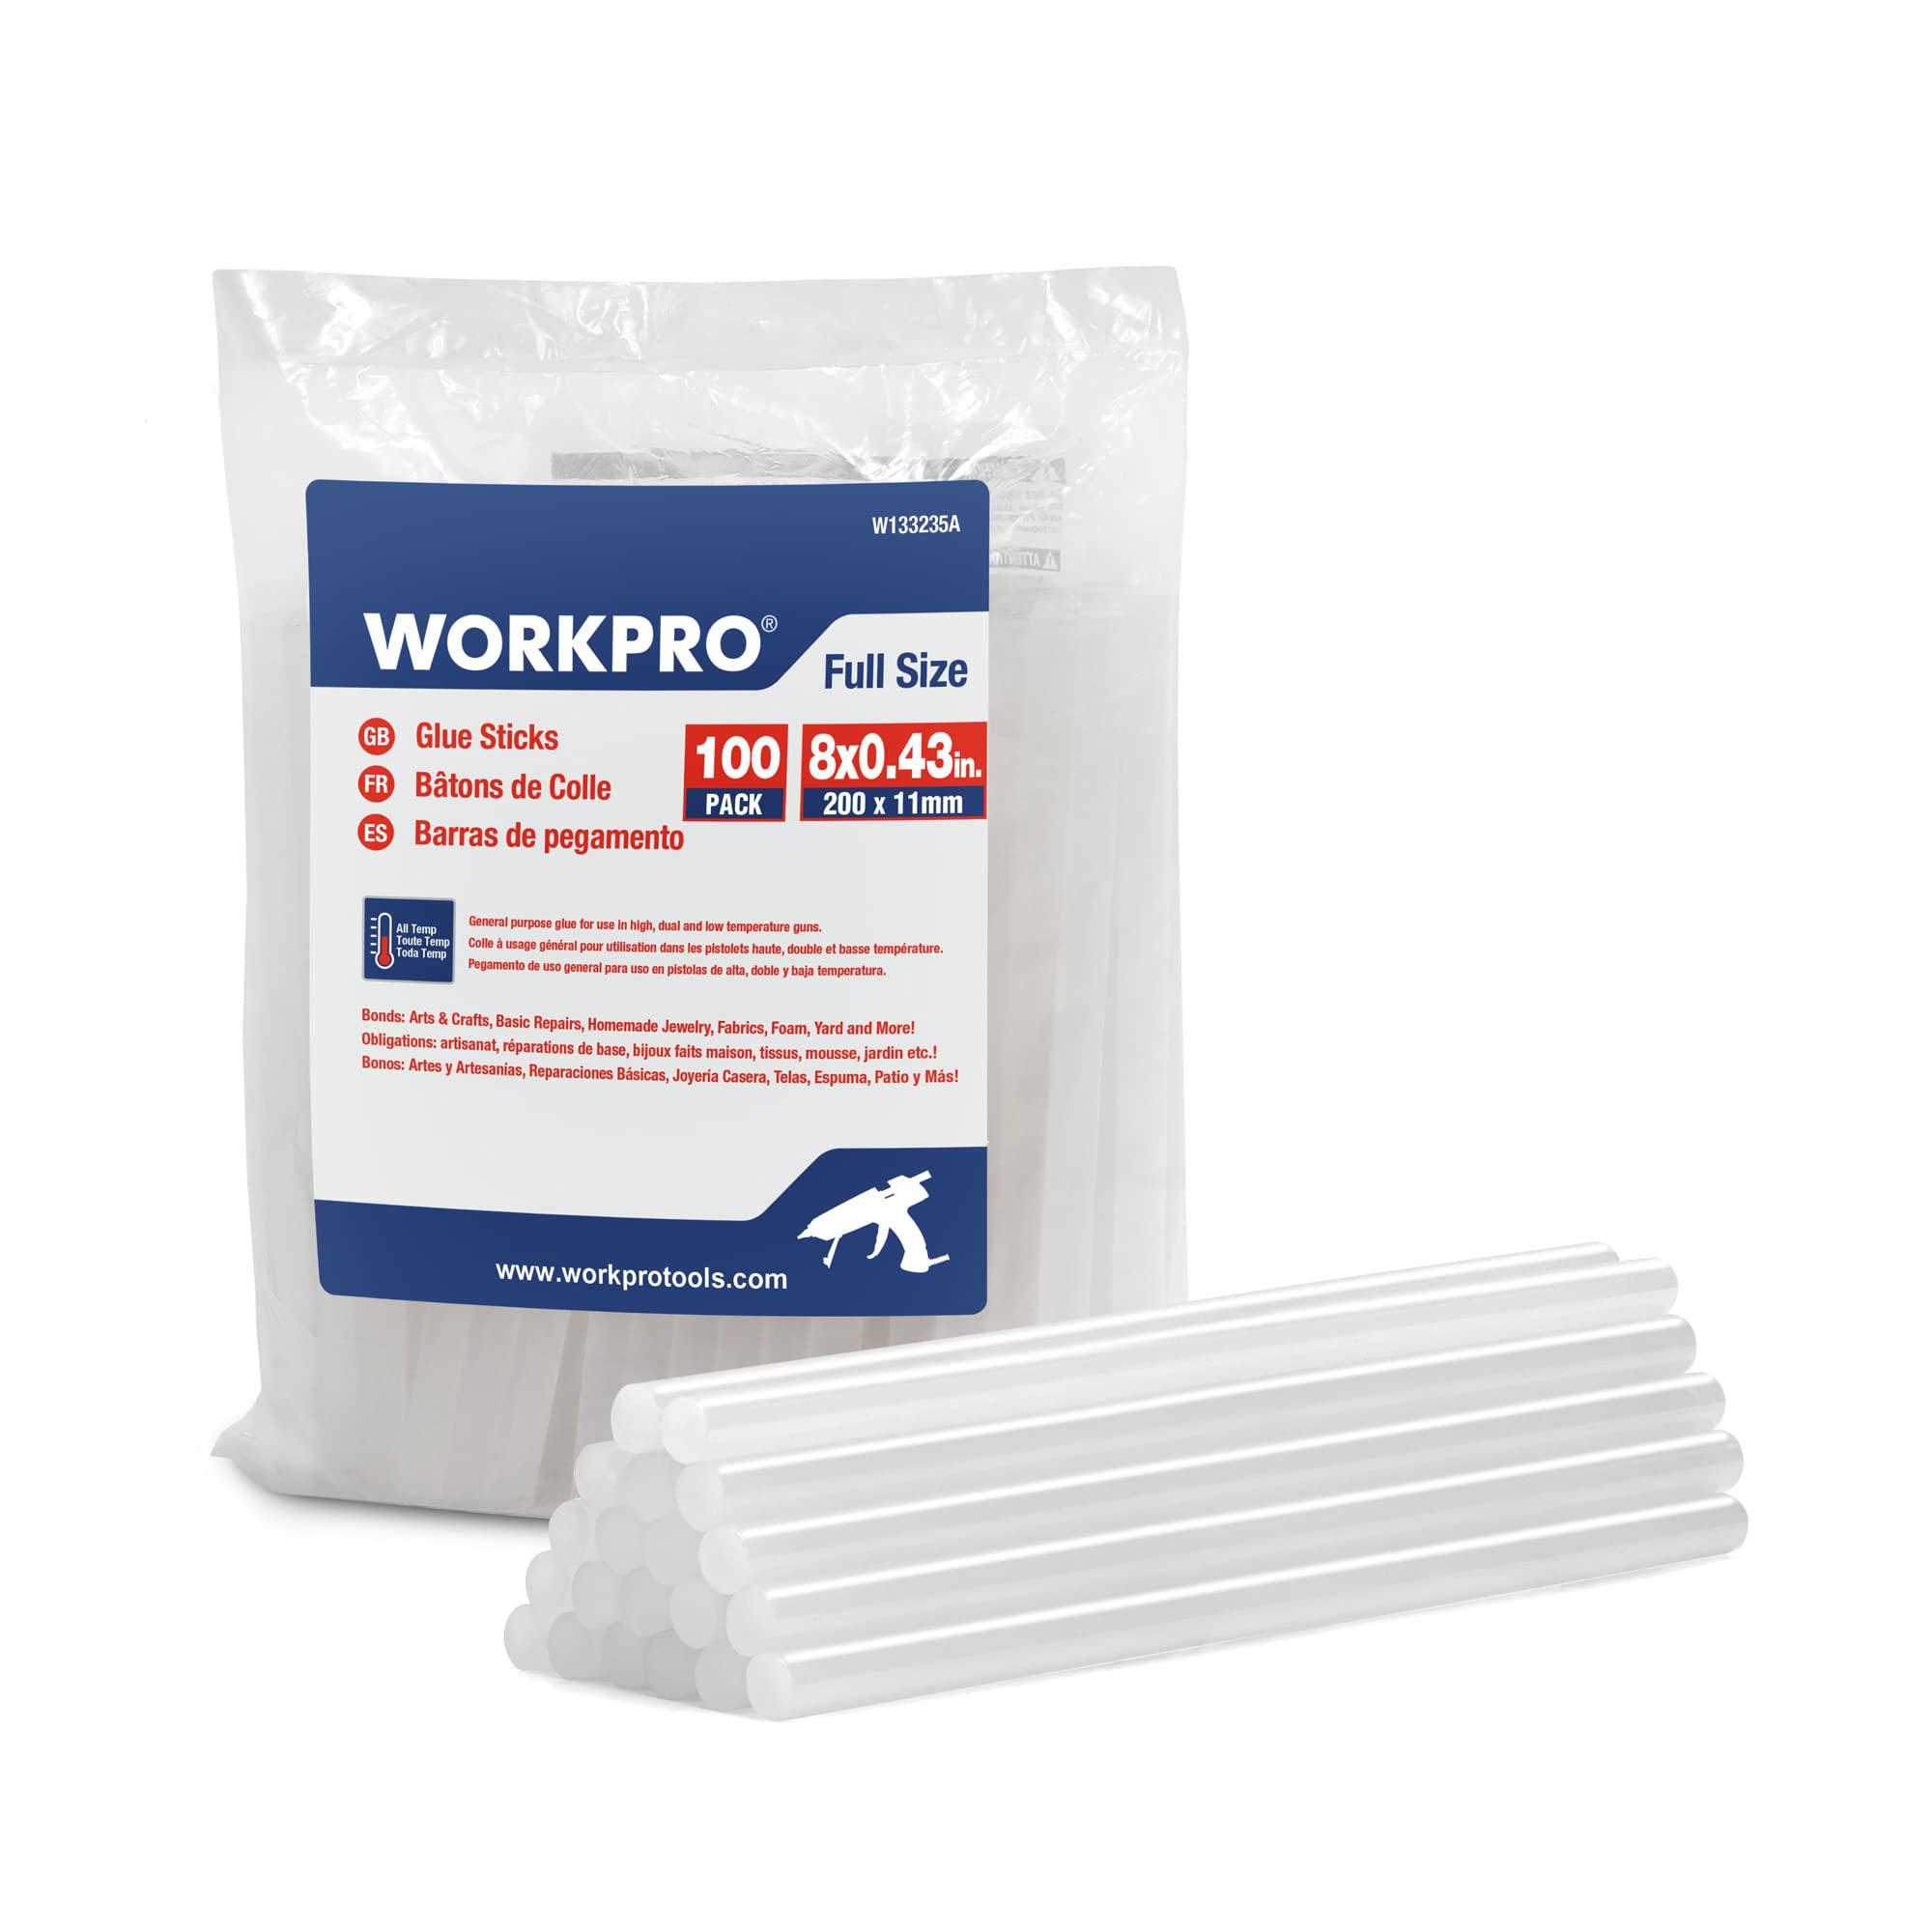 workpro full size hot glue sticks, 100-pack, 0.43x8 inches, compatible with most glue guns, multipurpose for diy art craft ge